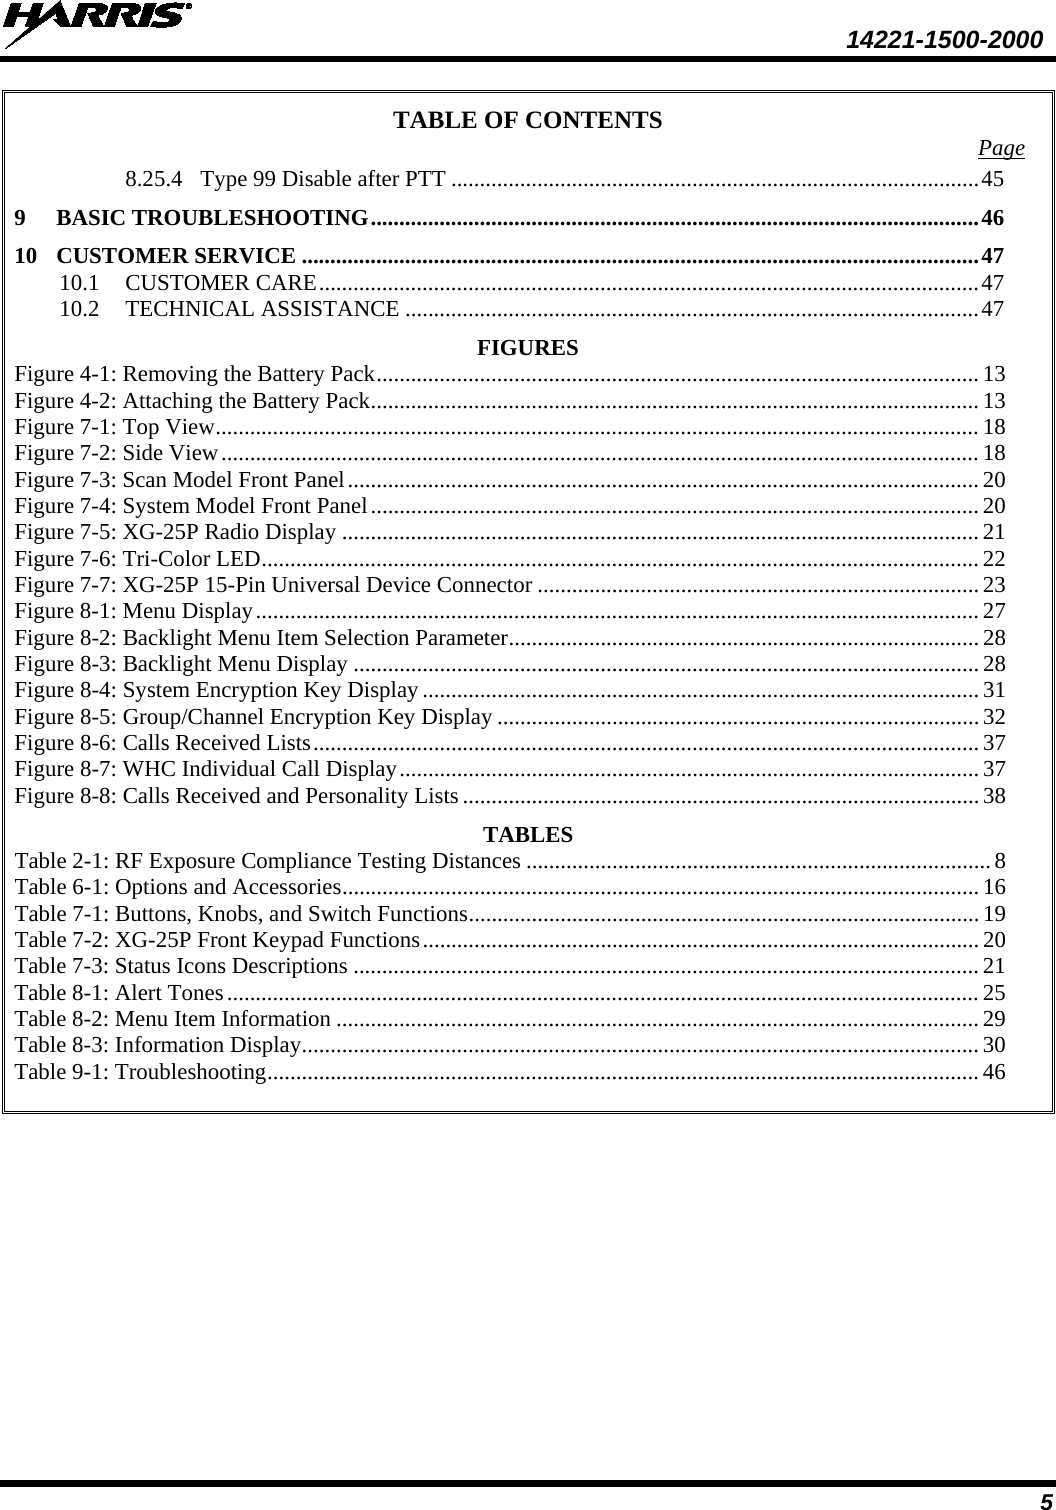  14221-1500-2000 5 TABLE OF CONTENTS Page 8.25.4 Type 99 Disable after PTT ............................................................................................ 45 9 BASIC TROUBLESHOOTING .......................................................................................................... 46 10 CUSTOMER SERVICE ...................................................................................................................... 47 10.1 CUSTOMER CARE ................................................................................................................... 47 10.2 TECHNICAL ASSISTANCE .................................................................................................... 47 FIGURES Figure 4-1: Removing the Battery Pack ......................................................................................................... 13 Figure 4-2: Attaching the Battery Pack .......................................................................................................... 13 Figure 7-1: Top View ..................................................................................................................................... 18 Figure 7-2: Side View .................................................................................................................................... 18 Figure 7-3: Scan Model Front Panel .............................................................................................................. 20 Figure 7-4: System Model Front Panel .......................................................................................................... 20 Figure 7-5: XG-25P Radio Display ............................................................................................................... 21 Figure 7-6: Tri-Color LED ............................................................................................................................. 22 Figure 7-7: XG-25P 15-Pin Universal Device Connector ............................................................................. 23 Figure 8-1: Menu Display .............................................................................................................................. 27 Figure 8-2: Backlight Menu Item Selection Parameter .................................................................................. 28 Figure 8-3: Backlight Menu Display ............................................................................................................. 28 Figure 8-4: System Encryption Key Display ................................................................................................. 31 Figure 8-5: Group/Channel Encryption Key Display .................................................................................... 32 Figure 8-6: Calls Received Lists .................................................................................................................... 37 Figure 8-7: WHC Individual Call Display ..................................................................................................... 37 Figure 8-8: Calls Received and Personality Lists .......................................................................................... 38 TABLES Table 2-1: RF Exposure Compliance Testing Distances ................................................................................. 8 Table 6-1: Options and Accessories ............................................................................................................... 16 Table 7-1: Buttons, Knobs, and Switch Functions ......................................................................................... 19 Table 7-2: XG-25P Front Keypad Functions ................................................................................................. 20 Table 7-3: Status Icons Descriptions ............................................................................................................. 21 Table 8-1: Alert Tones ................................................................................................................................... 25 Table 8-2: Menu Item Information ................................................................................................................ 29 Table 8-3: Information Display ...................................................................................................................... 30 Table 9-1: Troubleshooting ............................................................................................................................ 46   